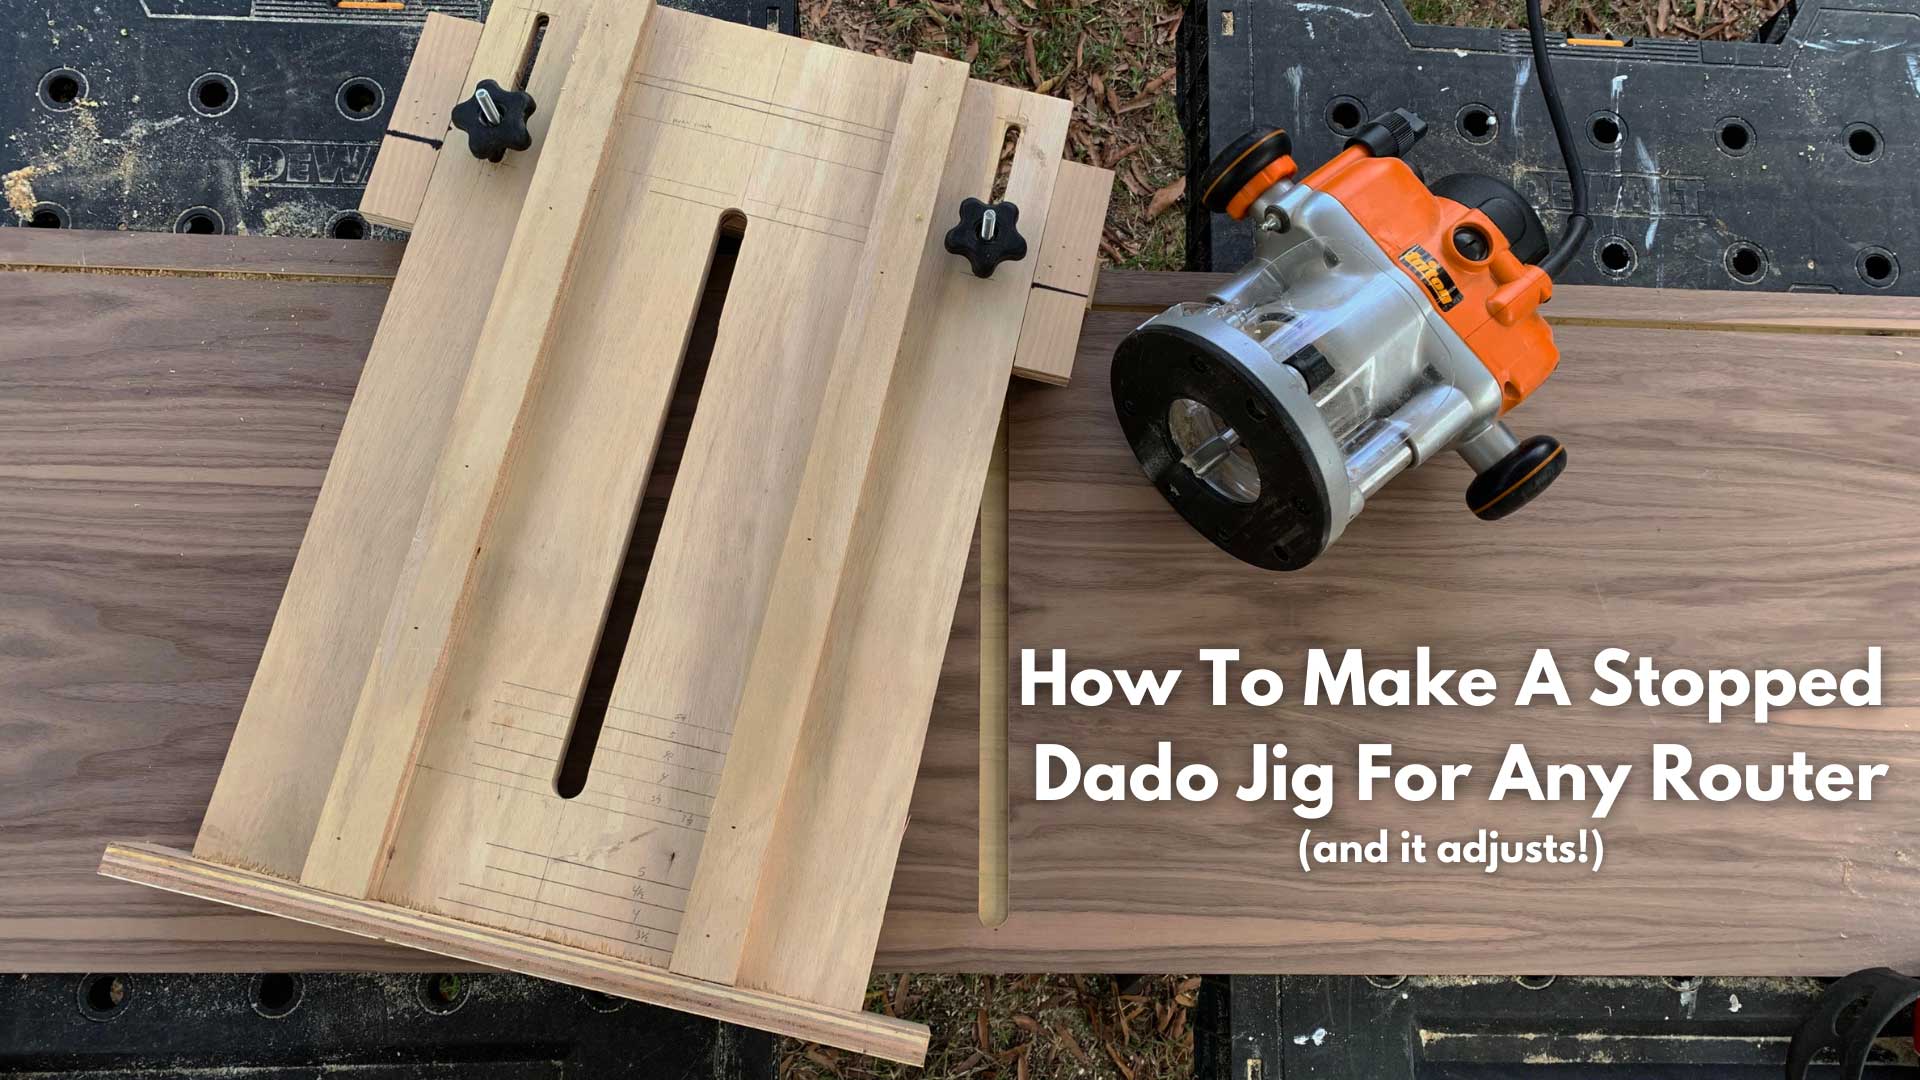 Stopped Dado Jig For Any Router